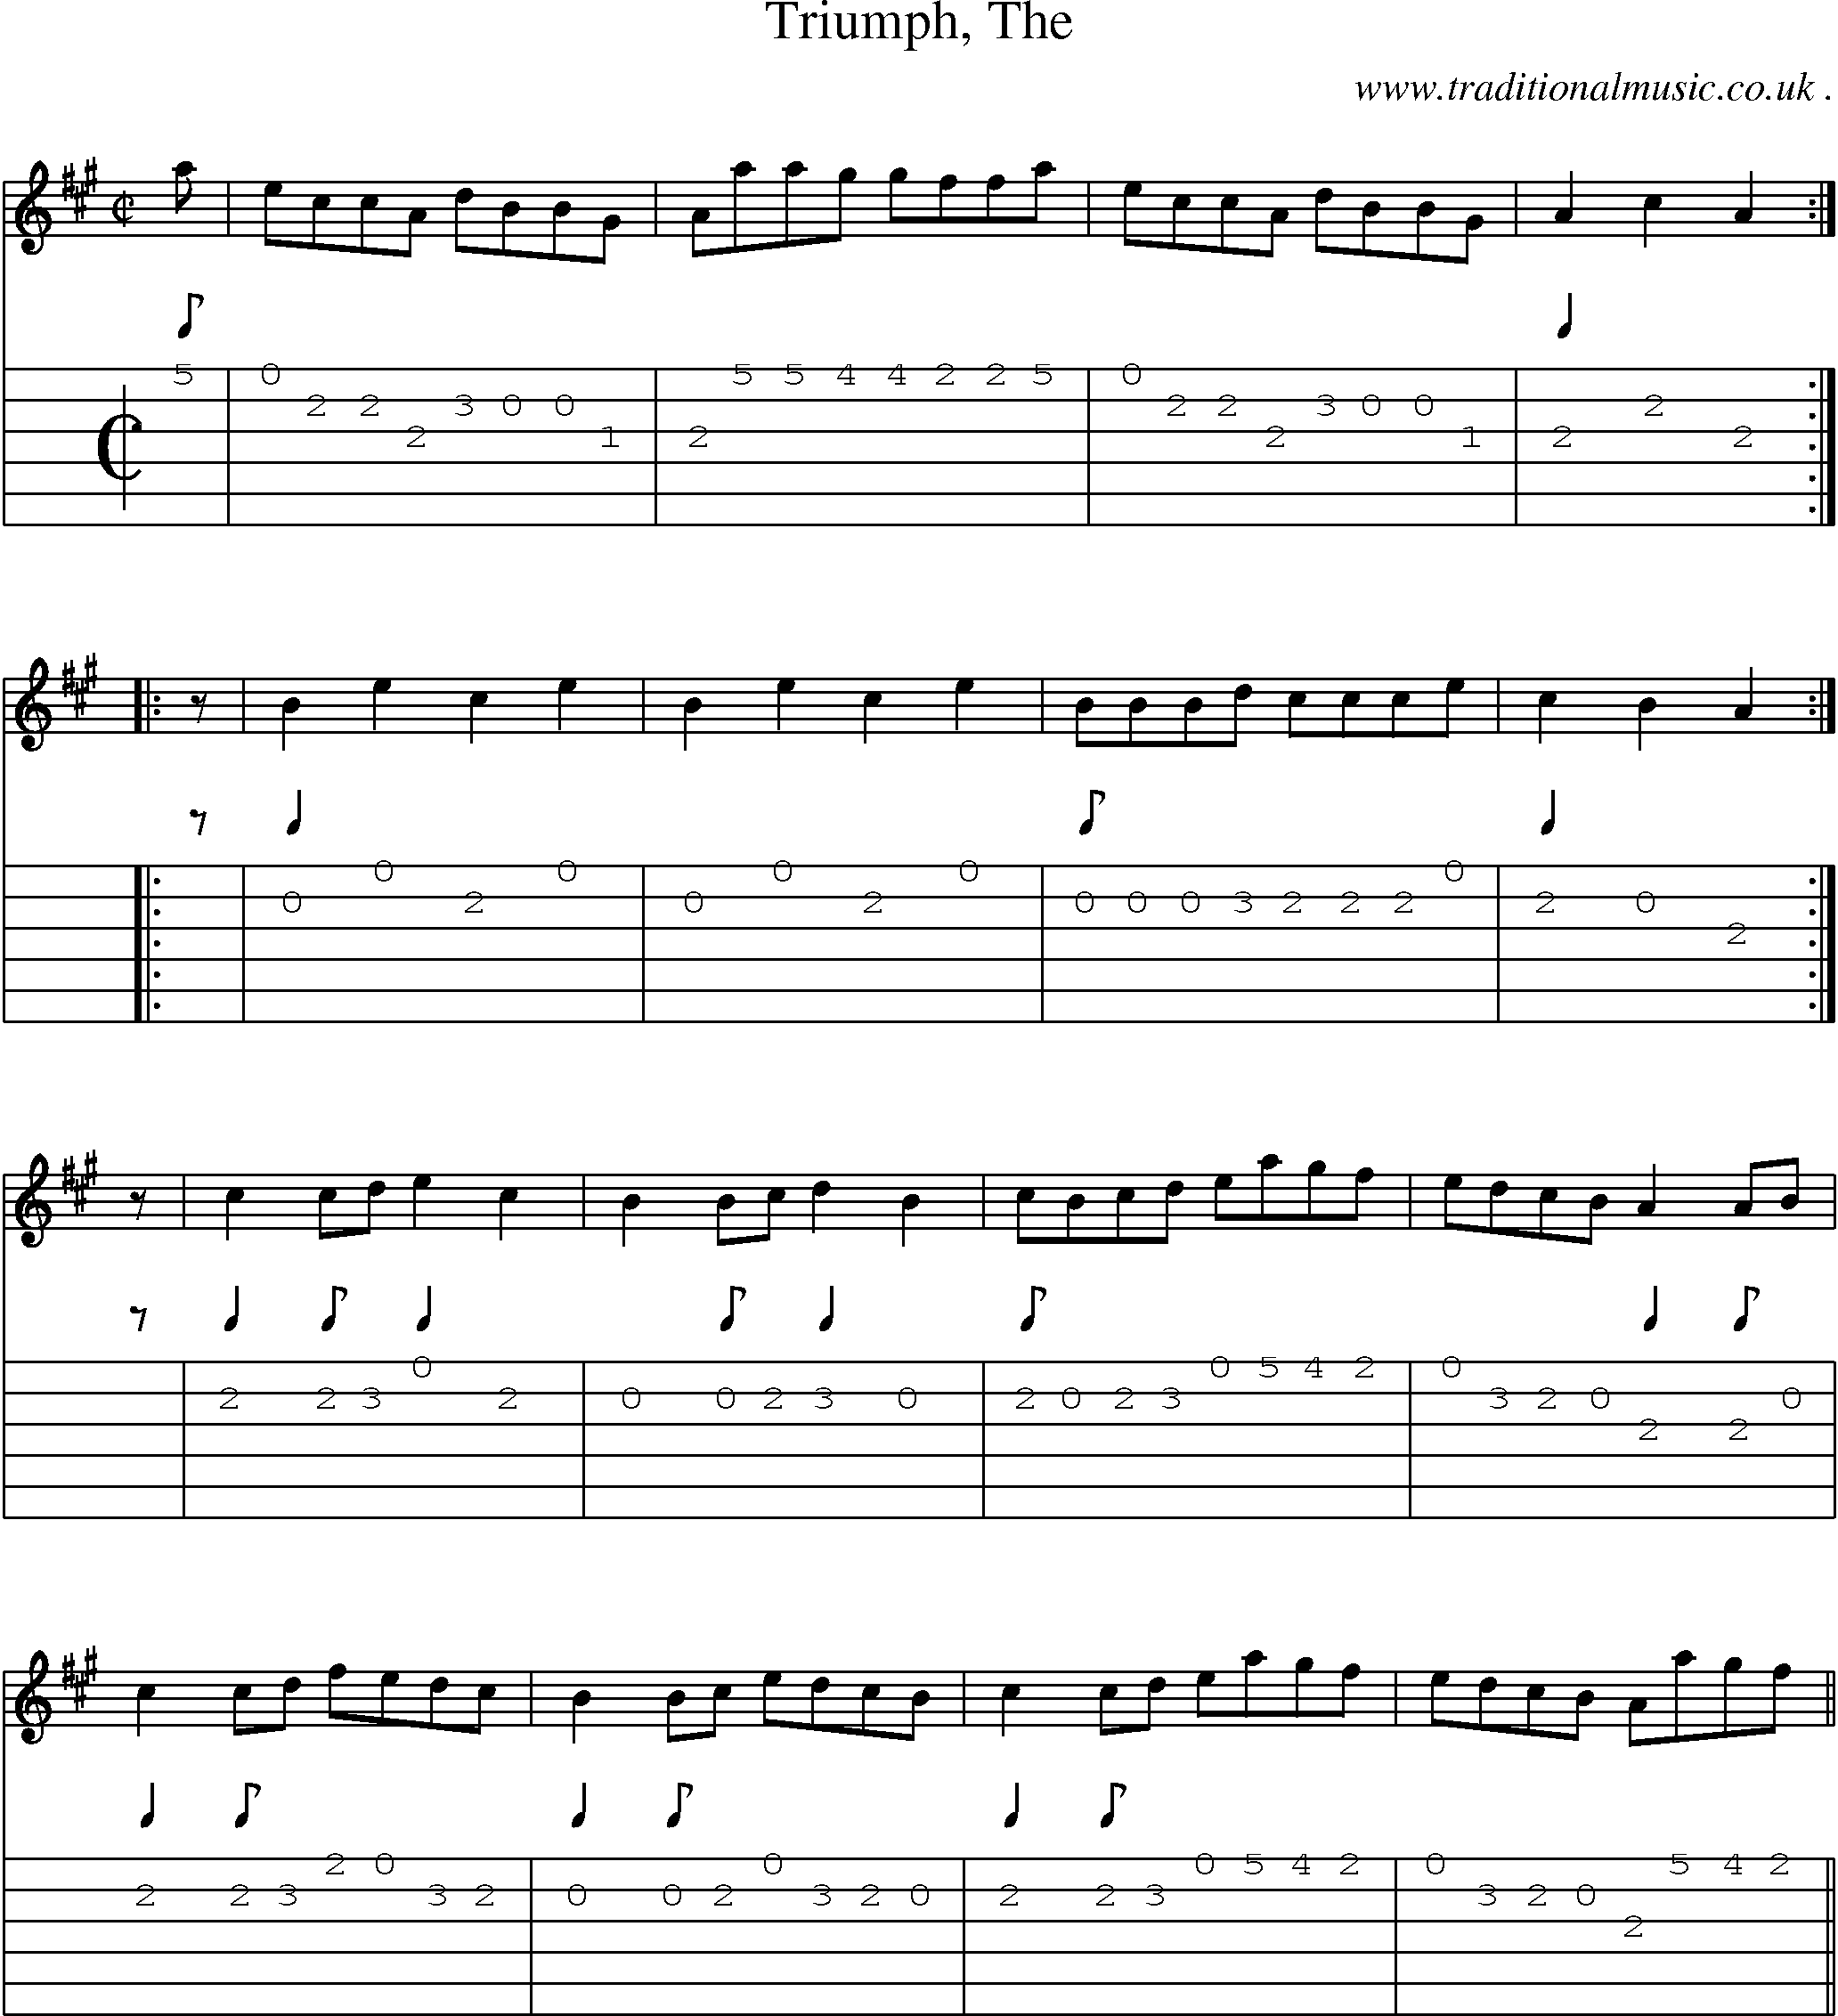 Sheet-music  score, Chords and Guitar Tabs for Triumph The